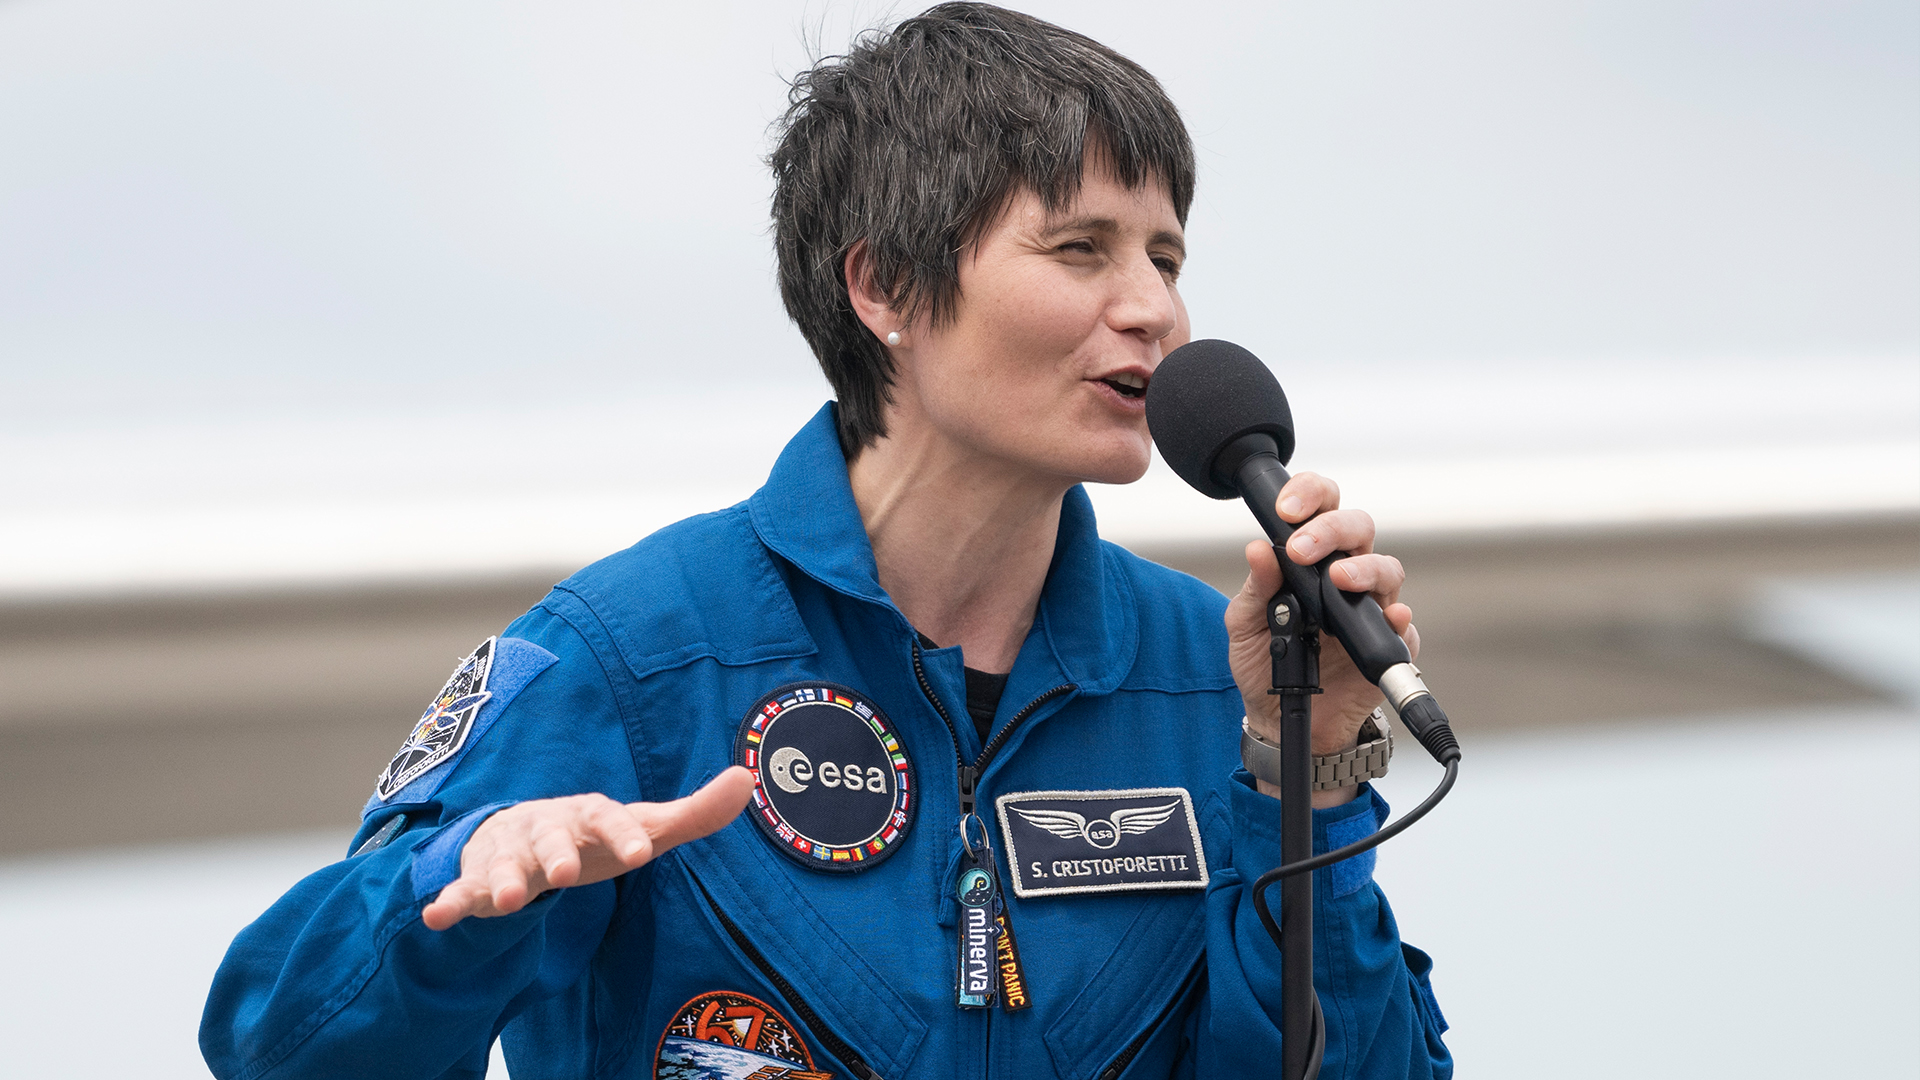 Samantha Cristoforetti: Who are you? The International Space Station’s female astronaut is about to take command